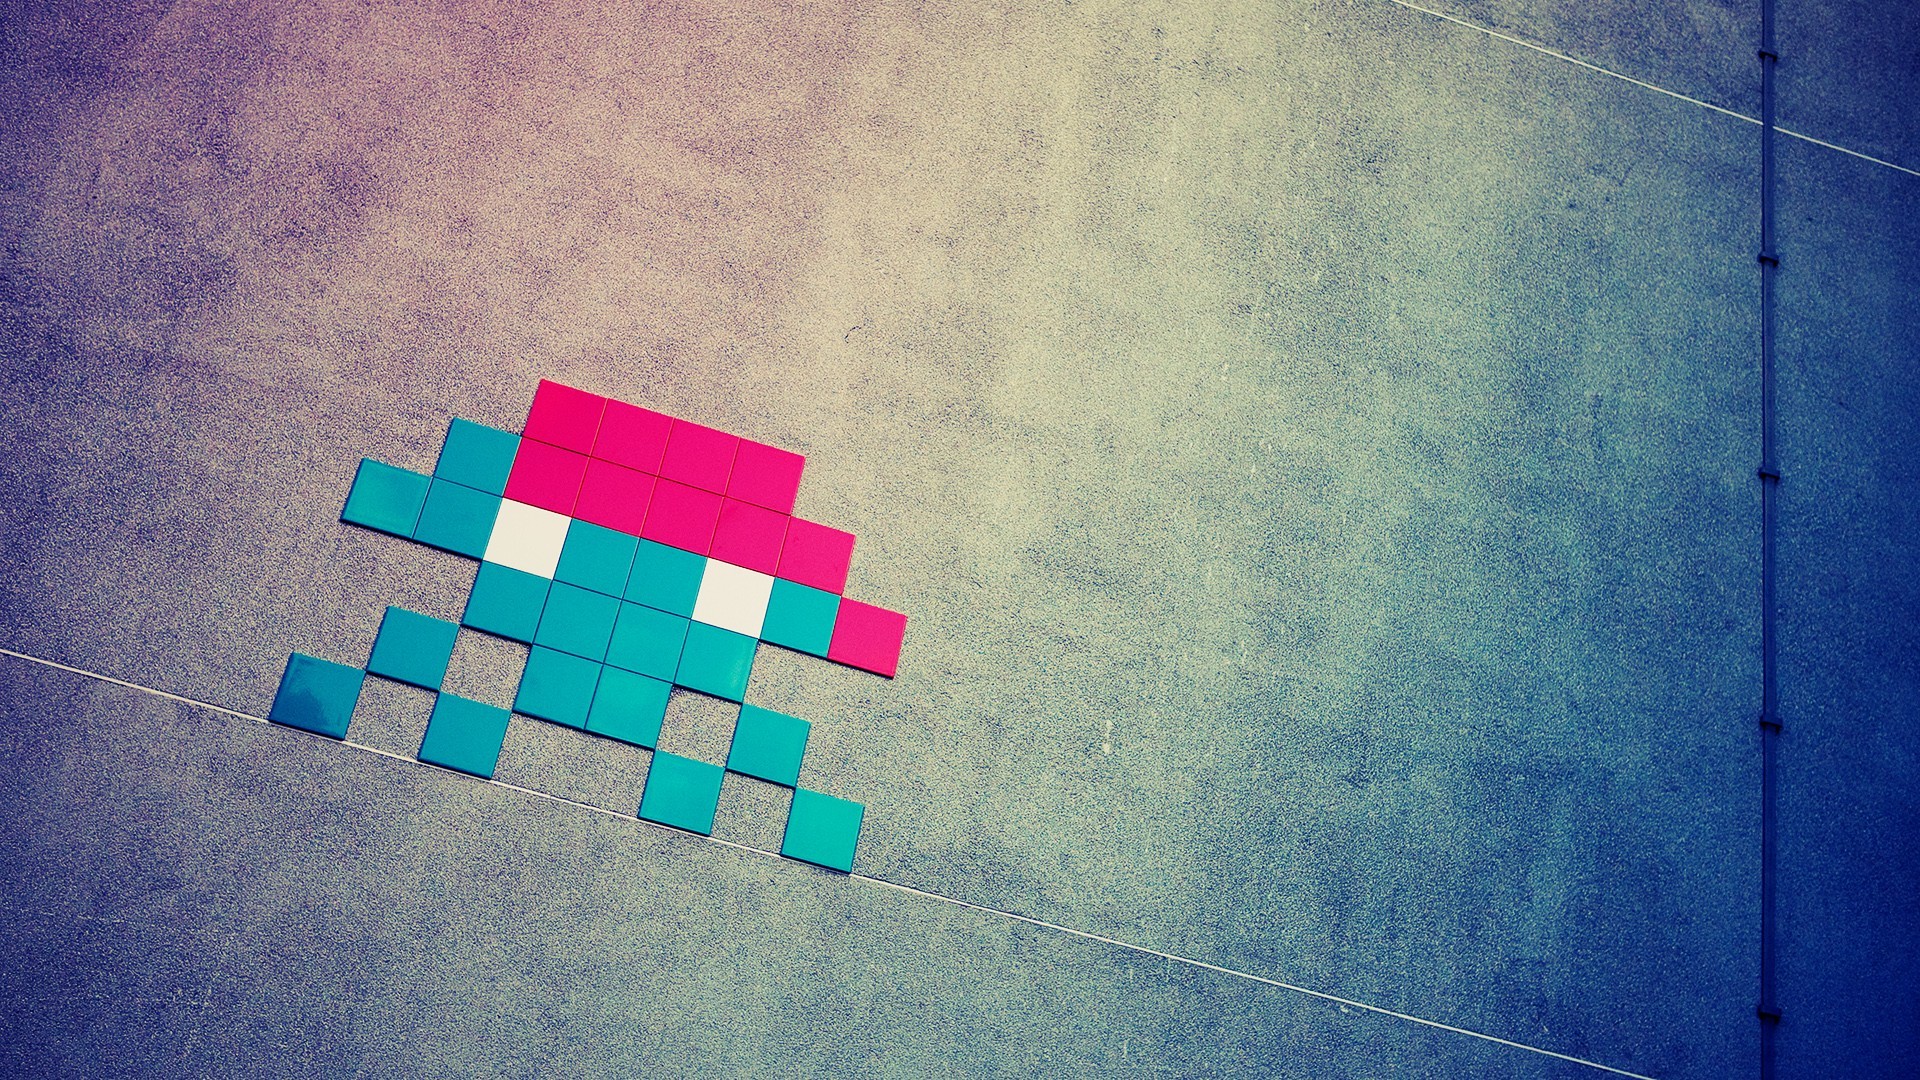 Space Invaders Square Fan Art Retro Games Cyan 1920x1080